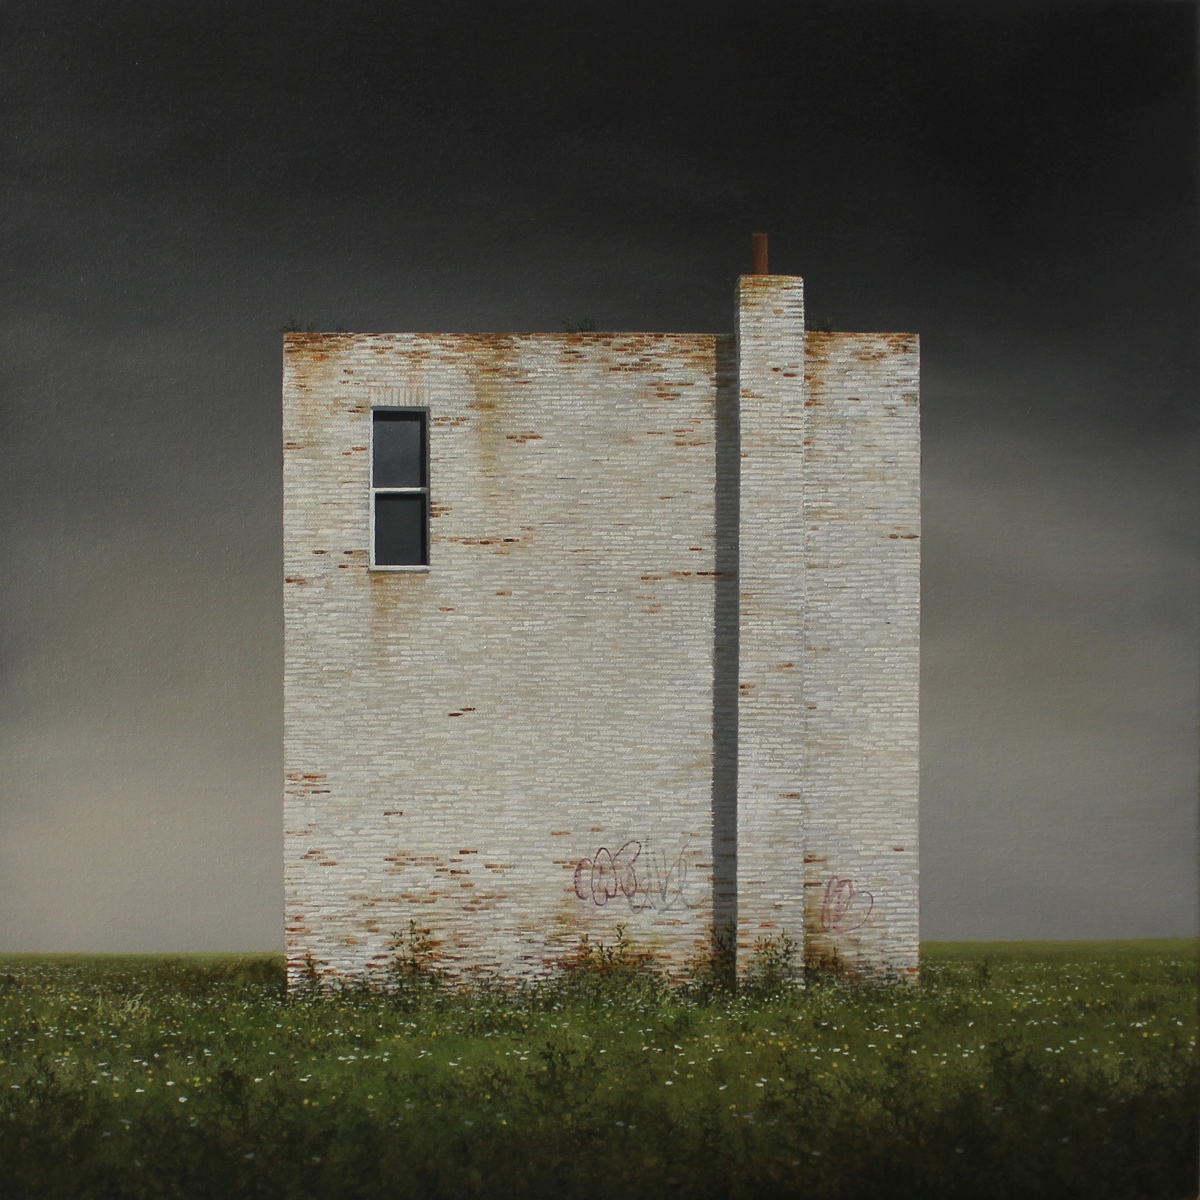 Lee Madgwick - The Nowhere Sightseeing Tour